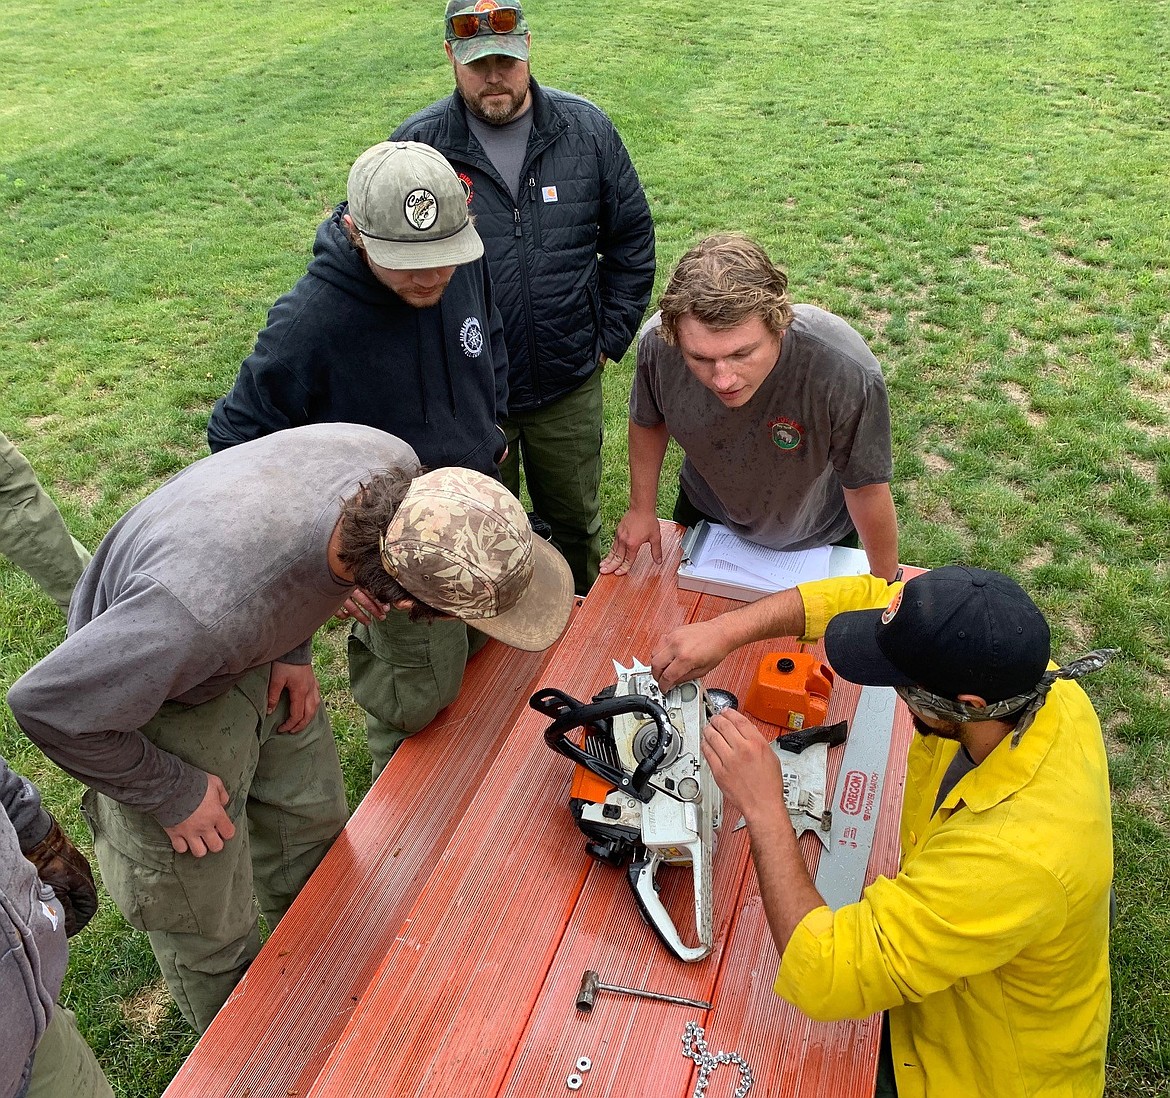 Wildland firefighters on the St Joe Ranger District learn how to assemble a chainsaw in prepartion for the wildfire season. Crews this year have taken extra precaution against COVid-19 while preparing for the season. (Photo Courtesy of the Idaho Panhandle National Forests)